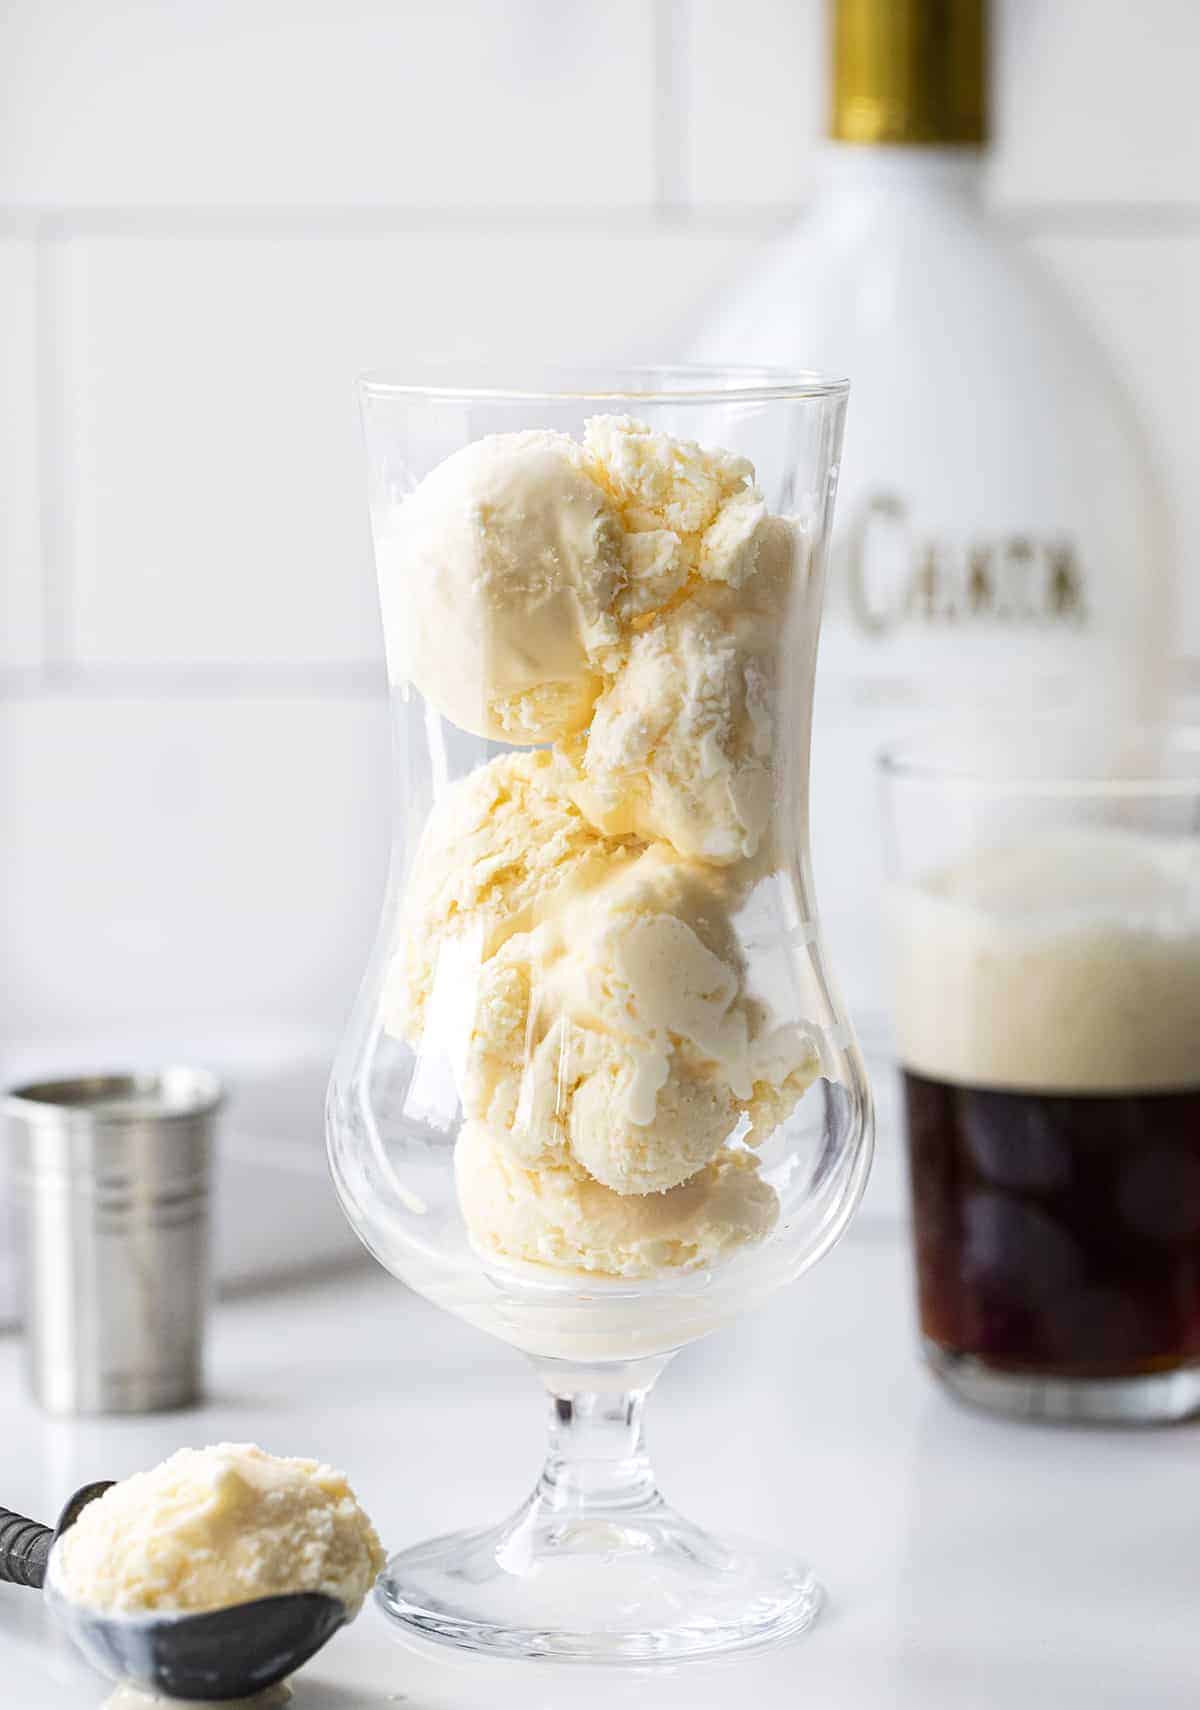 Glass Filled with Ice Cream to Make a Dirty Root Beer Float - RumChata Root Beer Float.